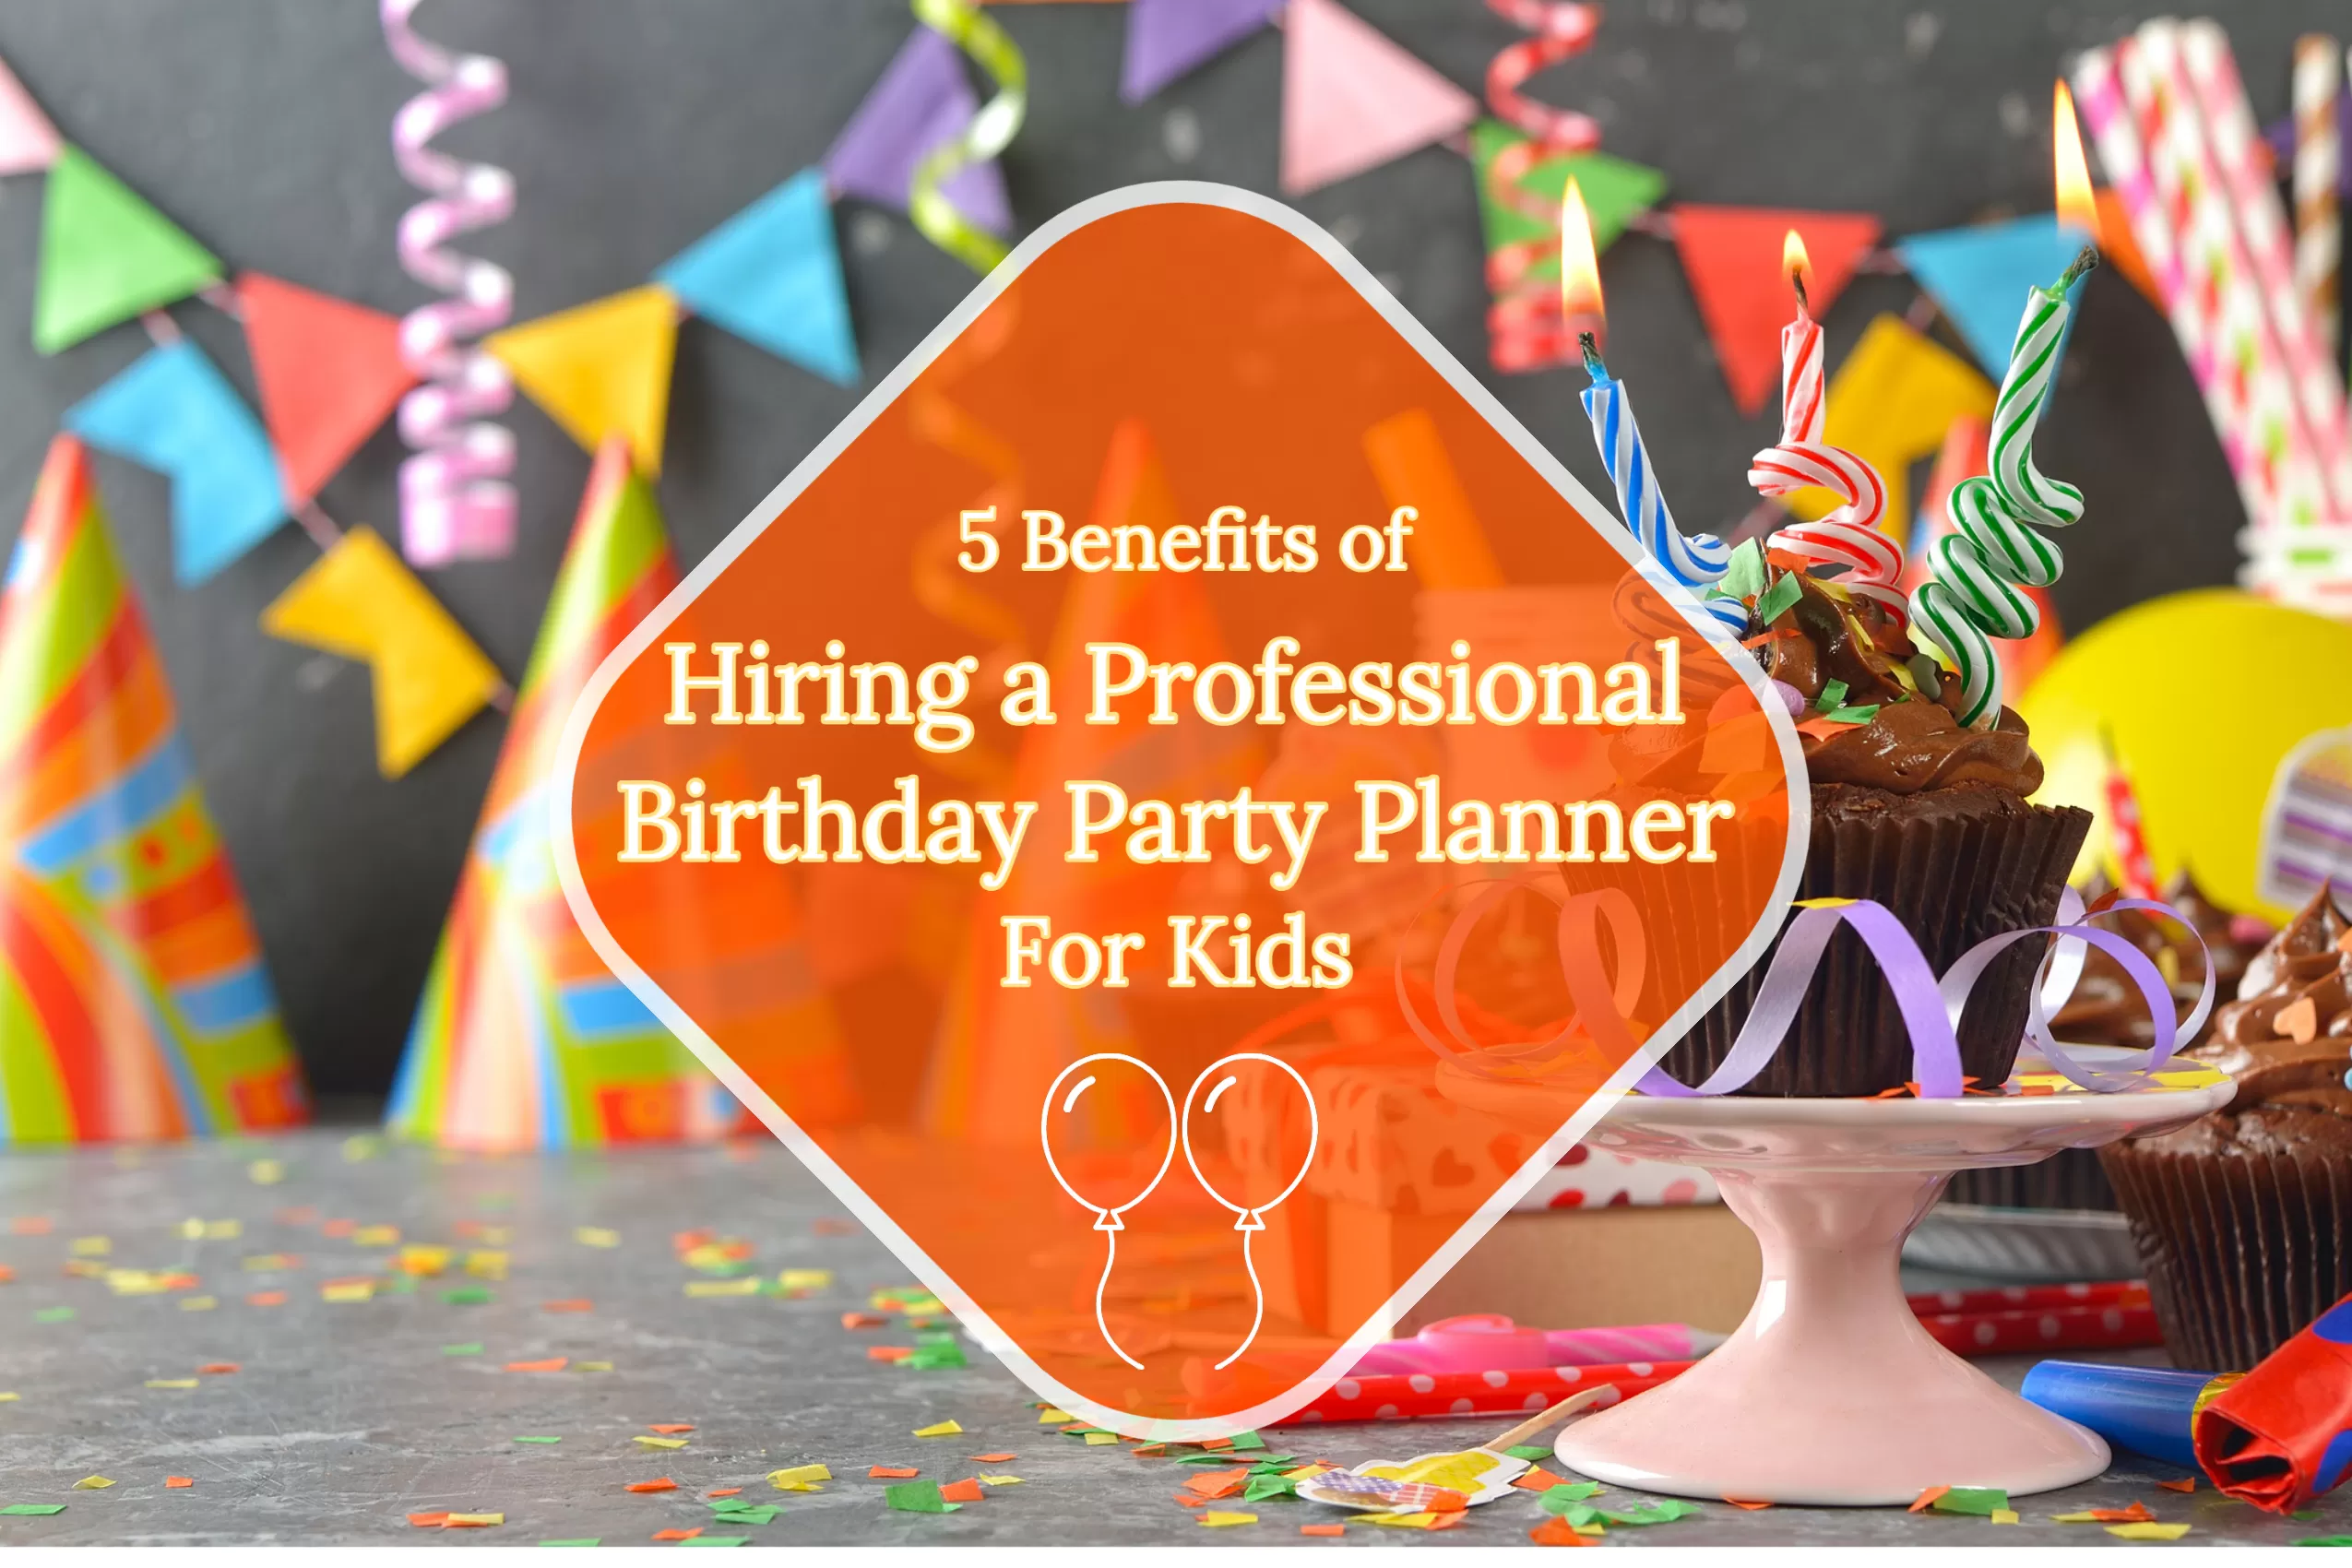 5 benefits of hiring a professional birthday party planner for kids.